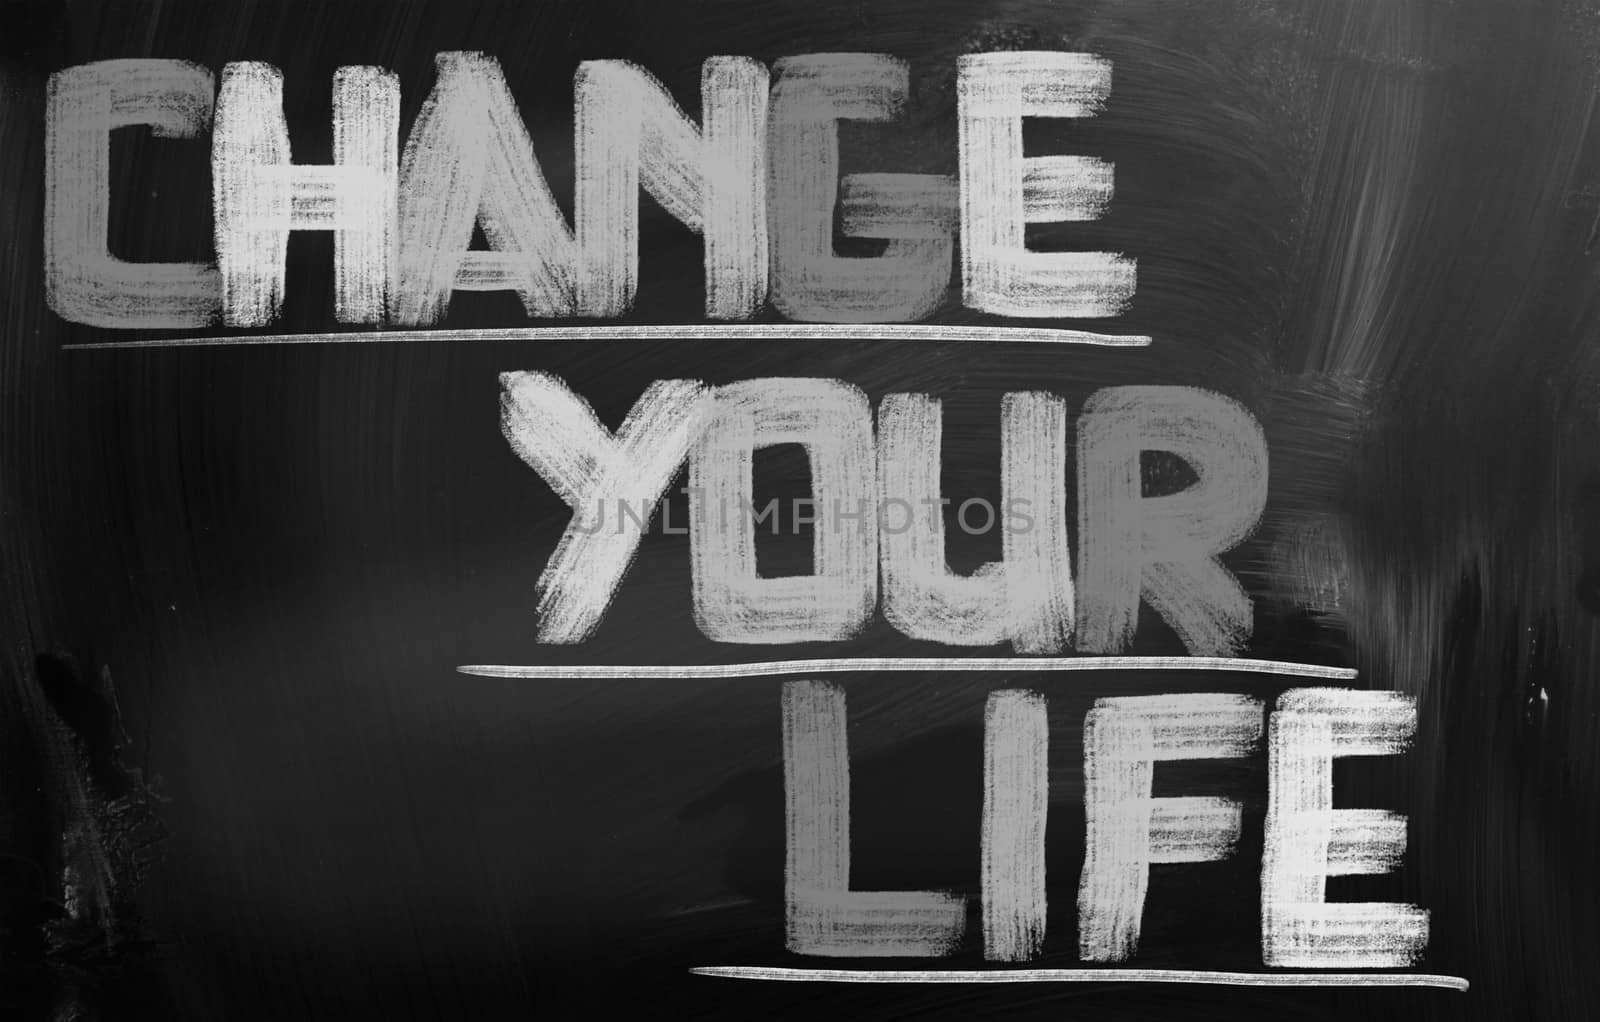 Change Your Life Concept